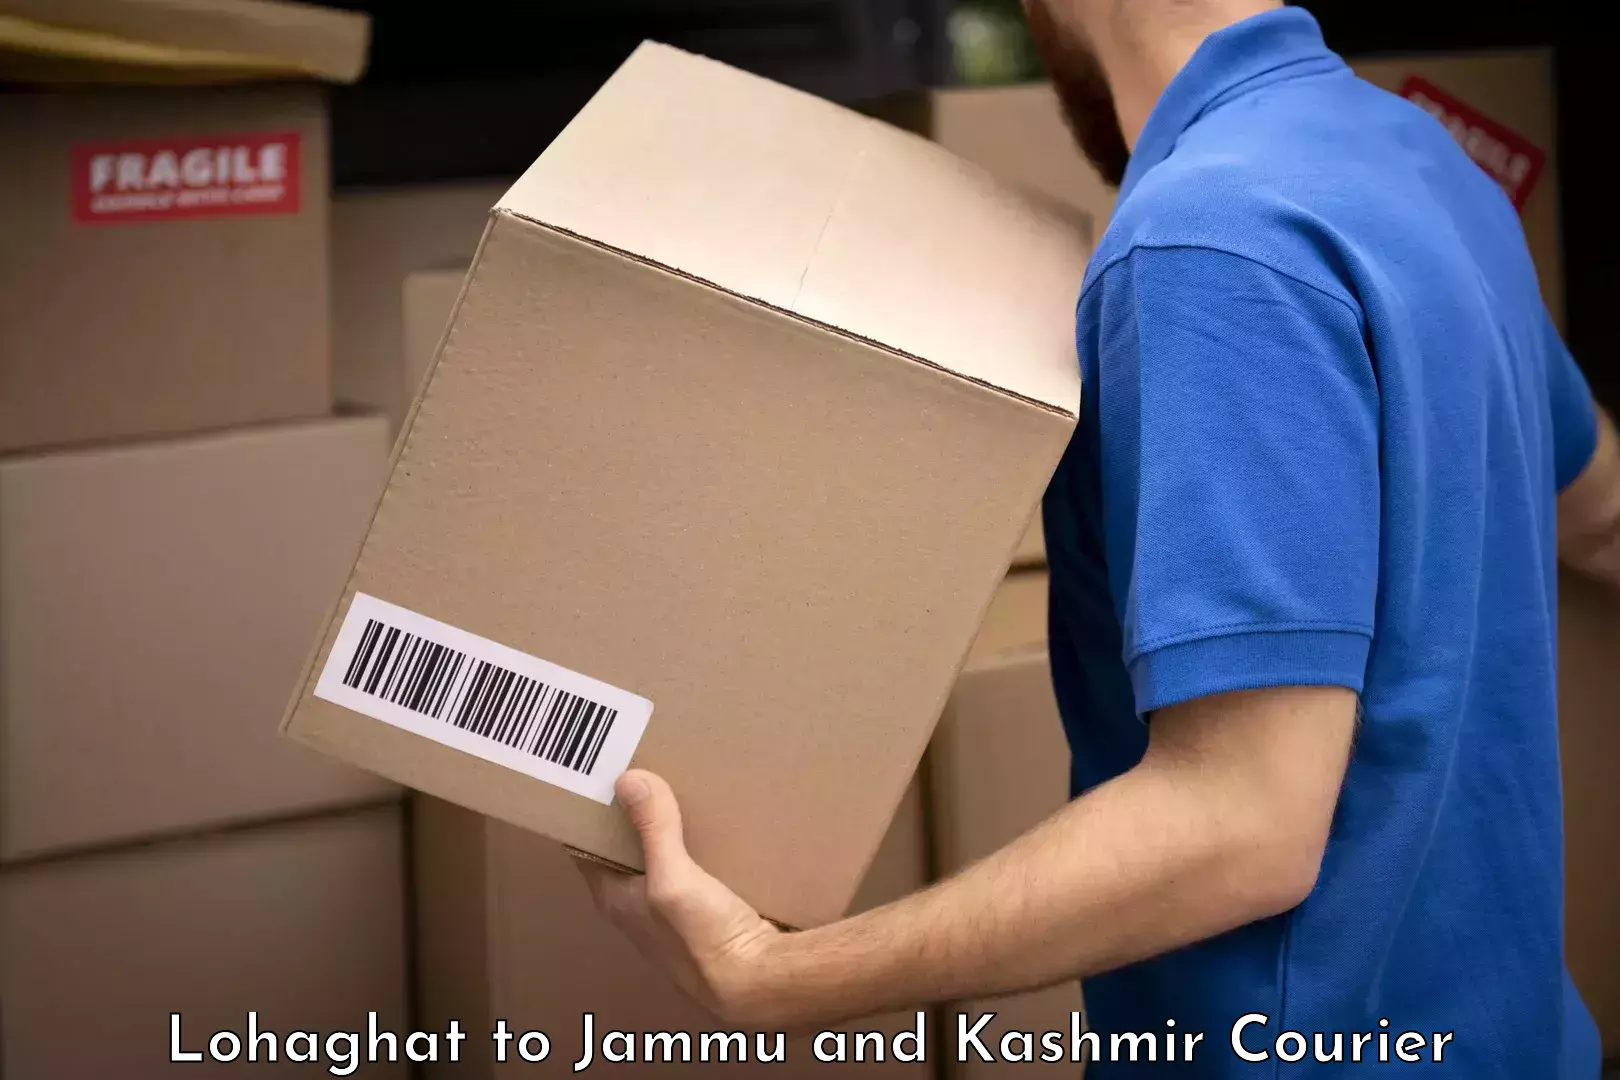 Luggage shipment specialists Lohaghat to Jammu and Kashmir